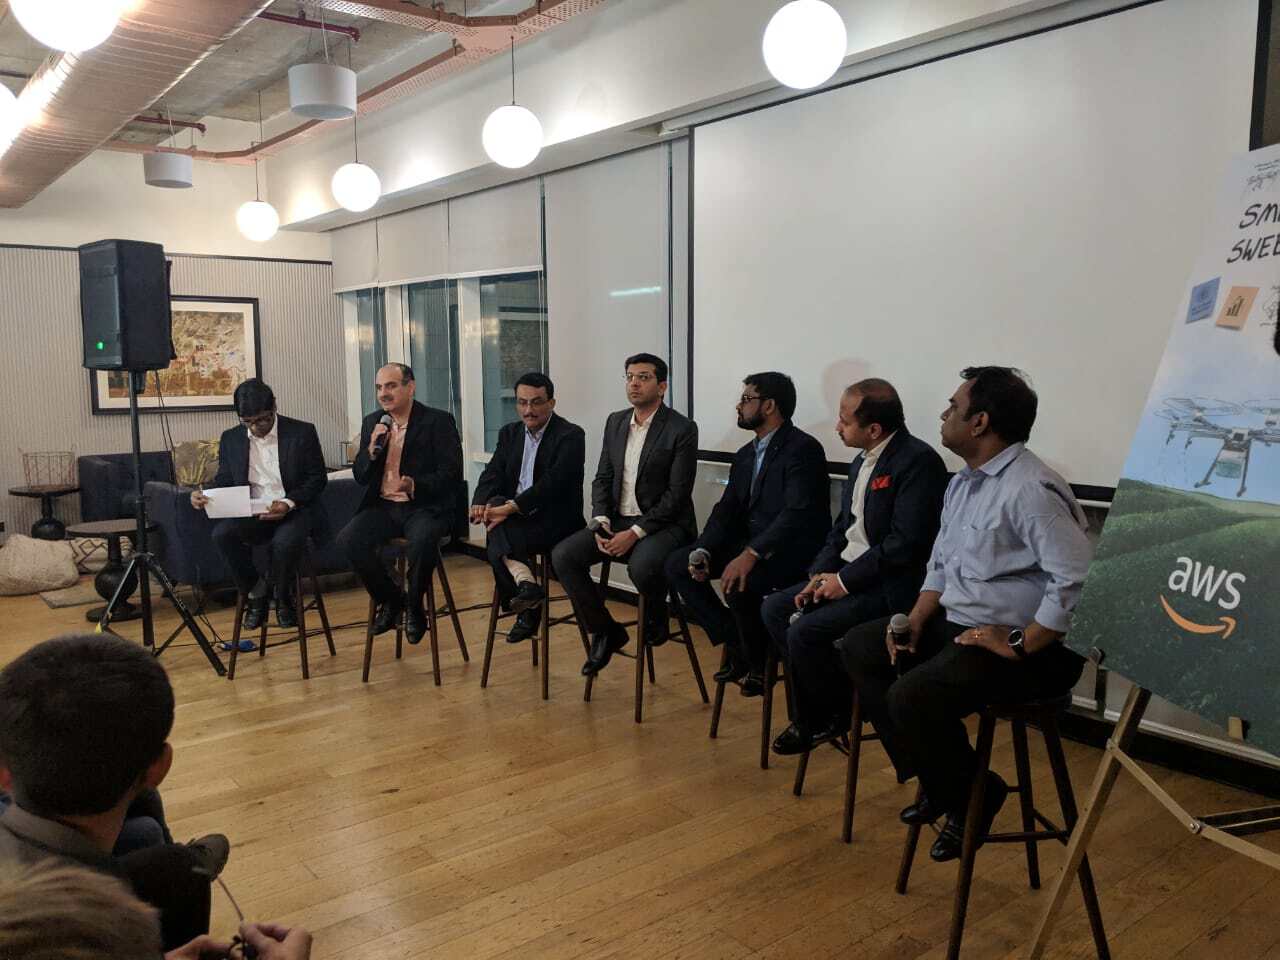 Entrepreneurs, enterprises and VCs explored initiatives to improve India’s agritech sector at AWS AgriTech Day 2019